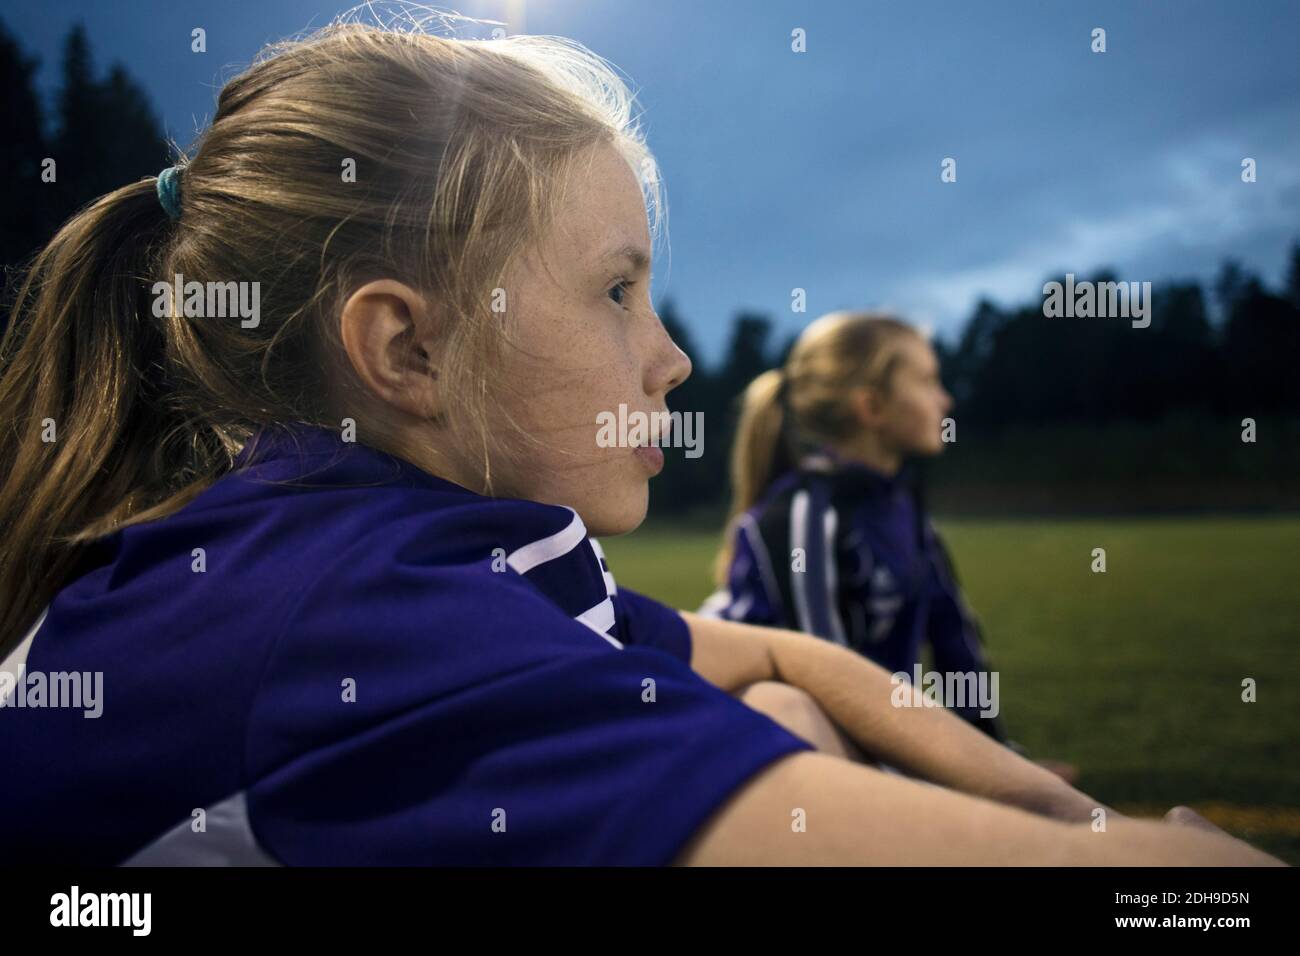 Side view of girl sitting at soccer field against sky Stock Photo